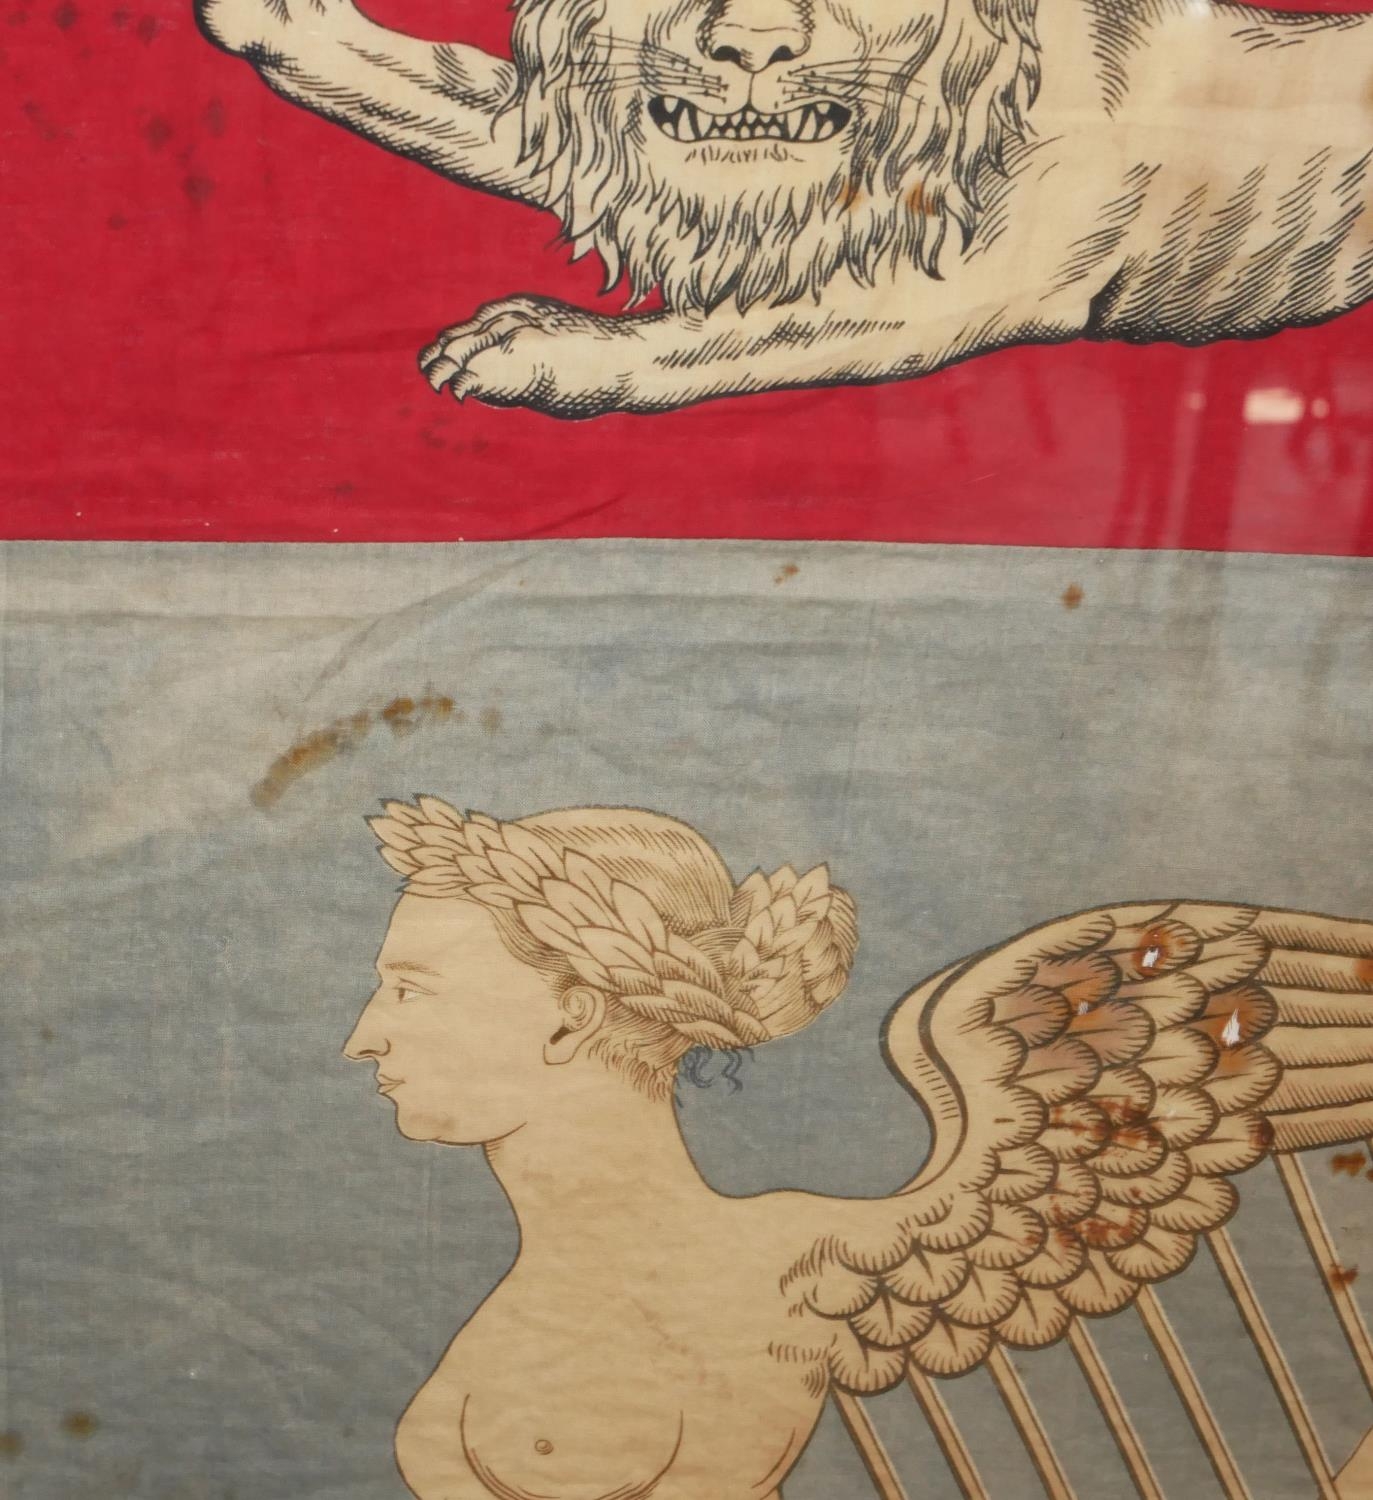 AN 18TH CENTURY ENGLISH IMPERIAL NATIONAL FLAG PAINTED ON COTTON With symbolic three English lions - Image 7 of 16